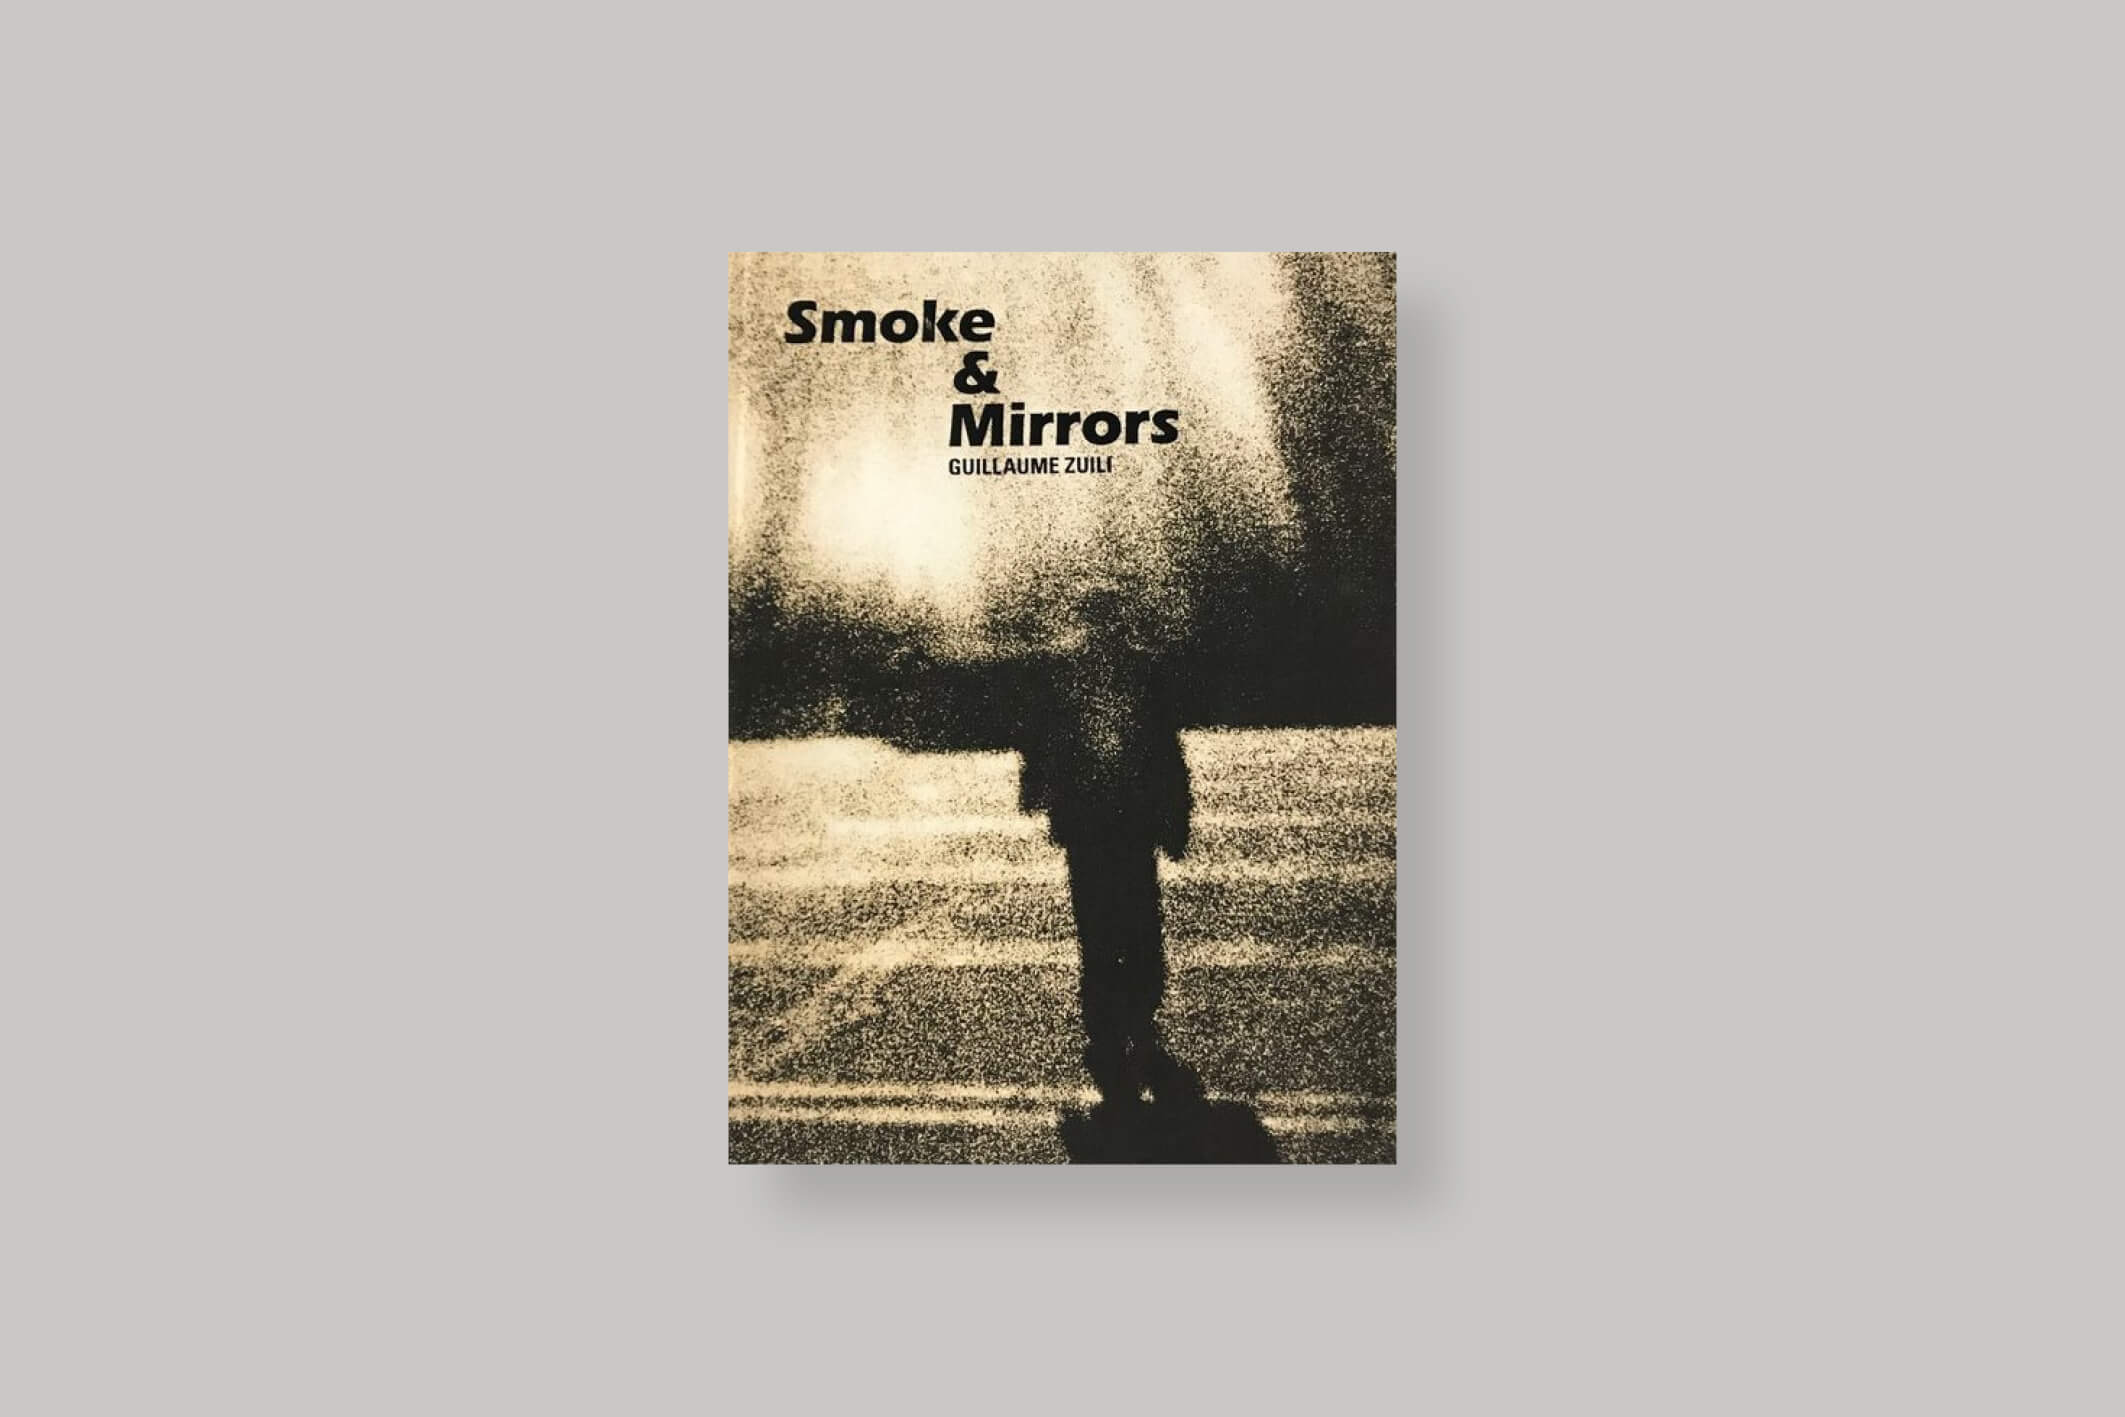 Smoke-and-mirrors-guillaume-zuili-editions-photosyntheses-cover